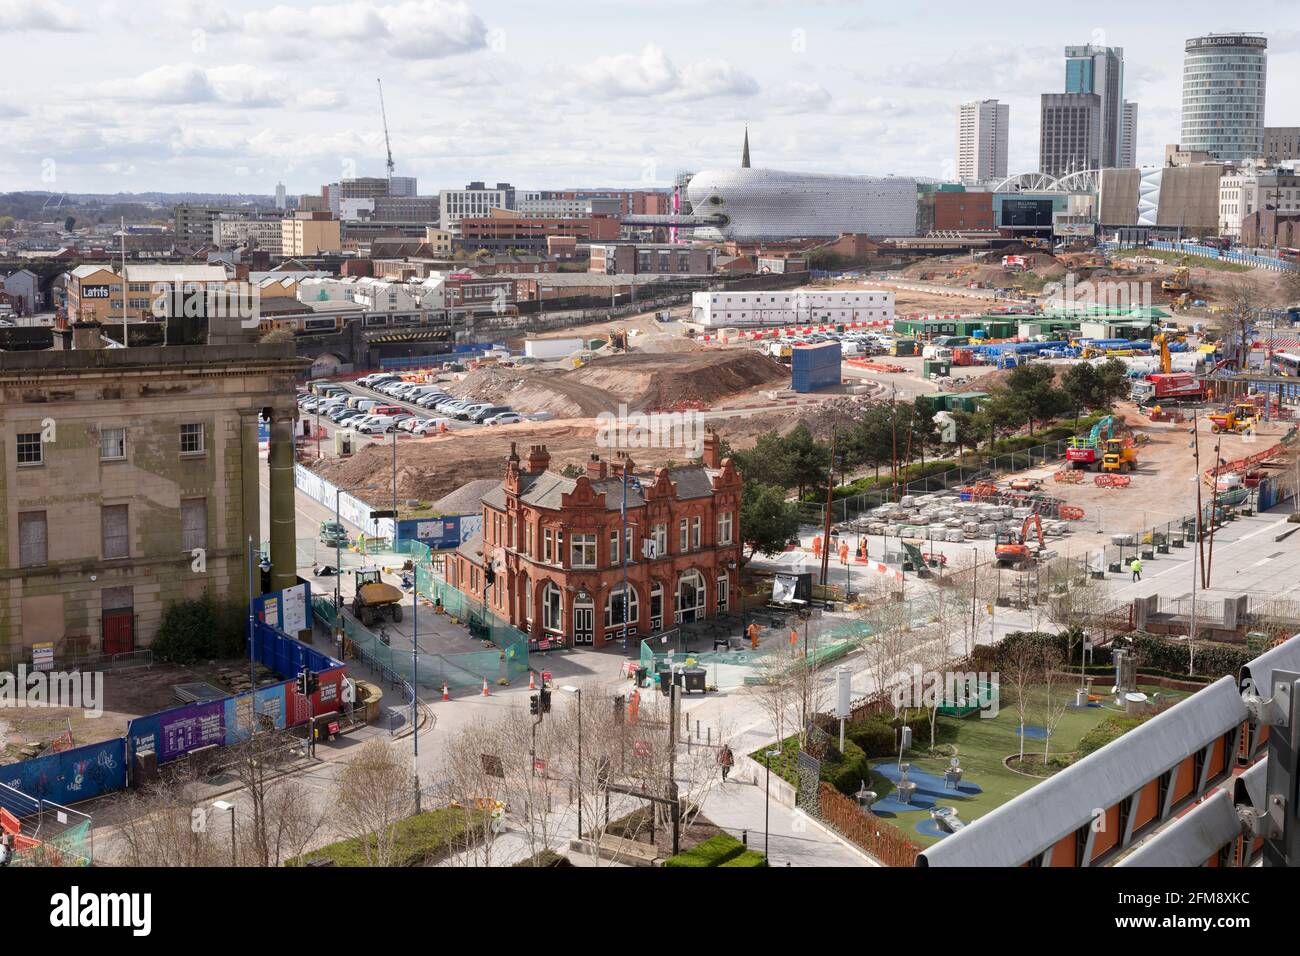 The HS2 construction site in Birmingham. Curzon Street station is the building on the left. Stock Photo